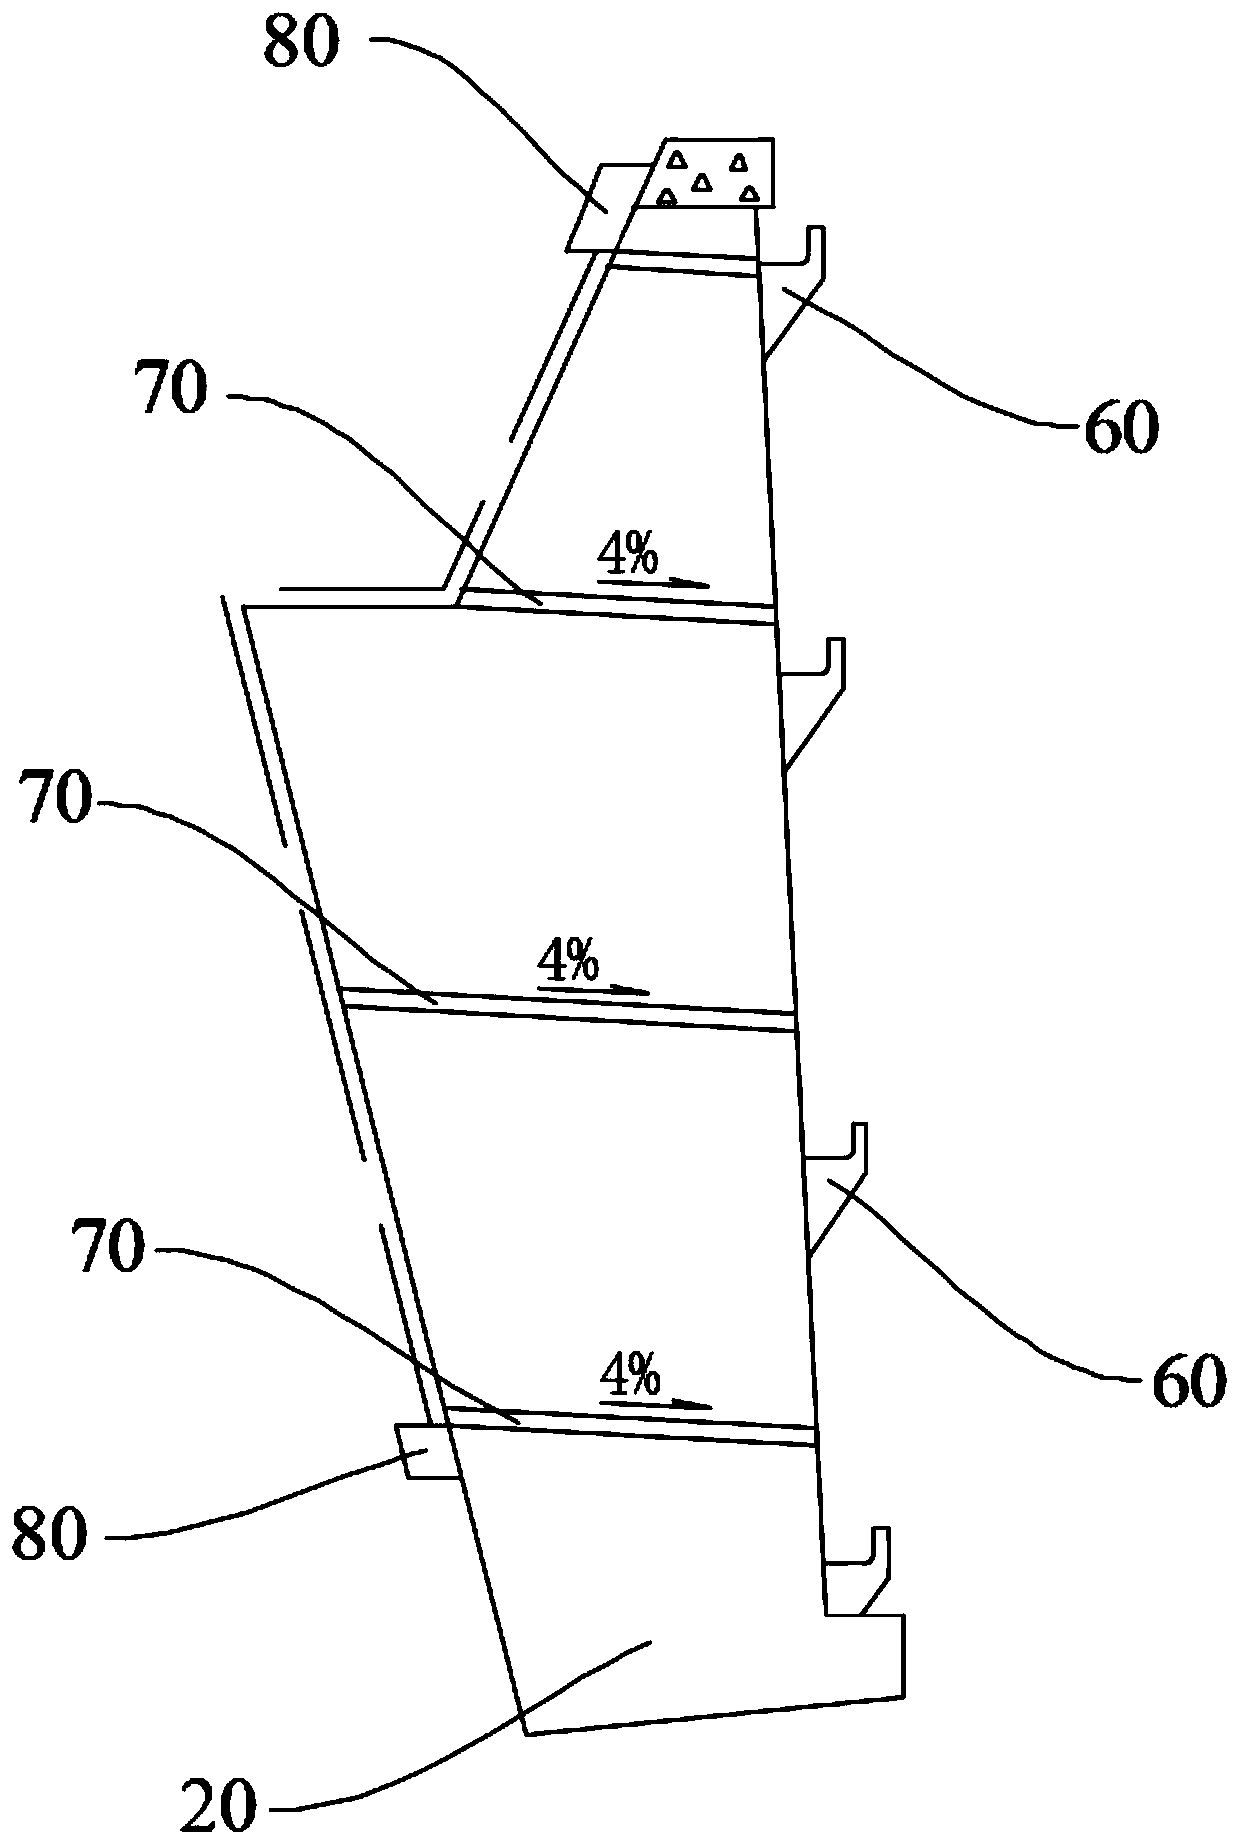 Subgrade structure for side slope